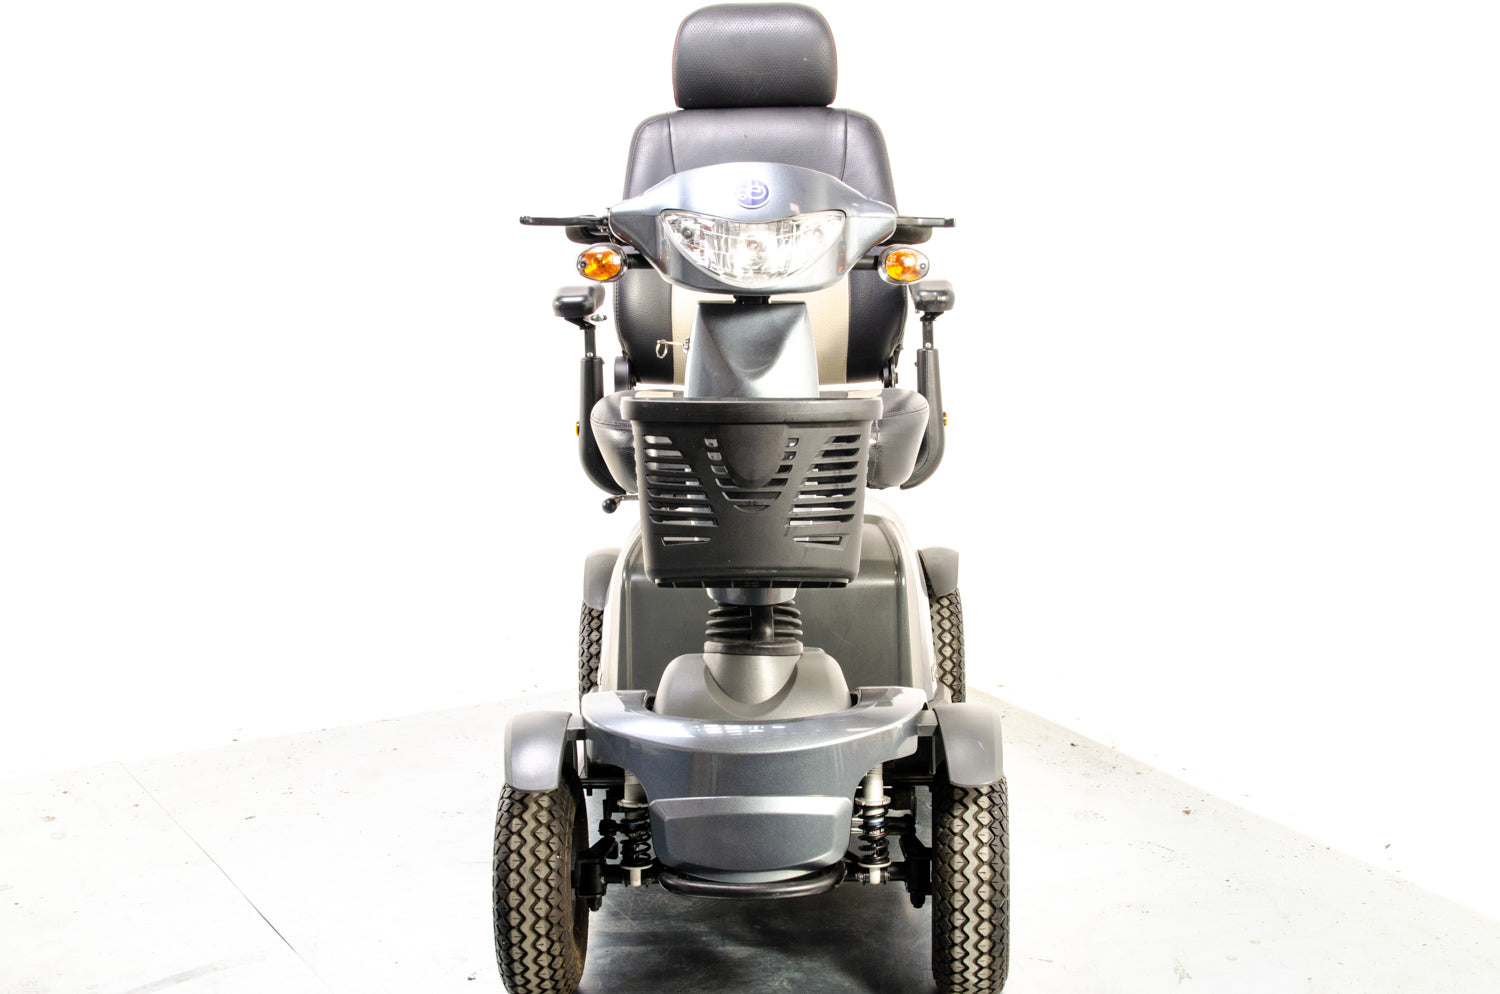 Excel Galaxy II All-Terrain Off-Road Used Mobility Scooter 8mph Van Os Large Comfy Class 3 Road Legal 13381